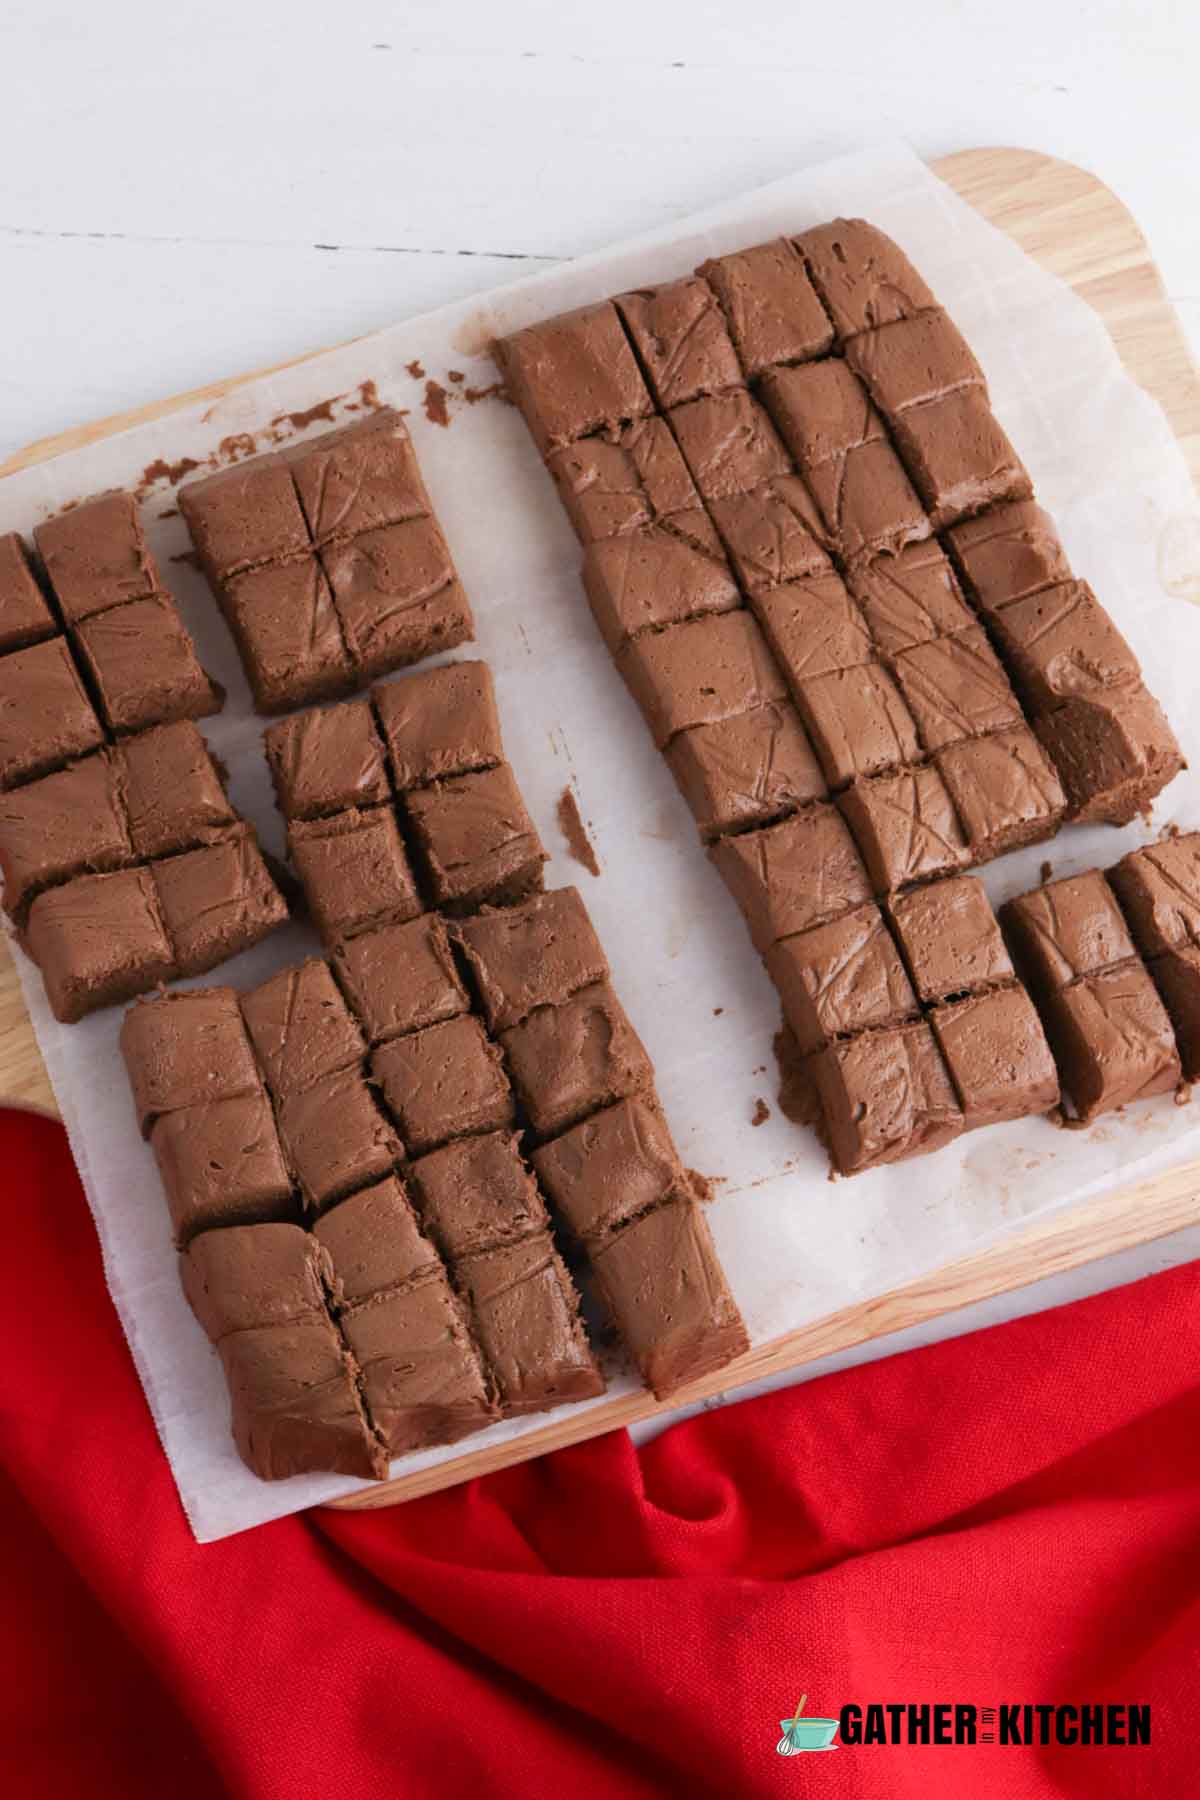 Chocolate cut up into squares.